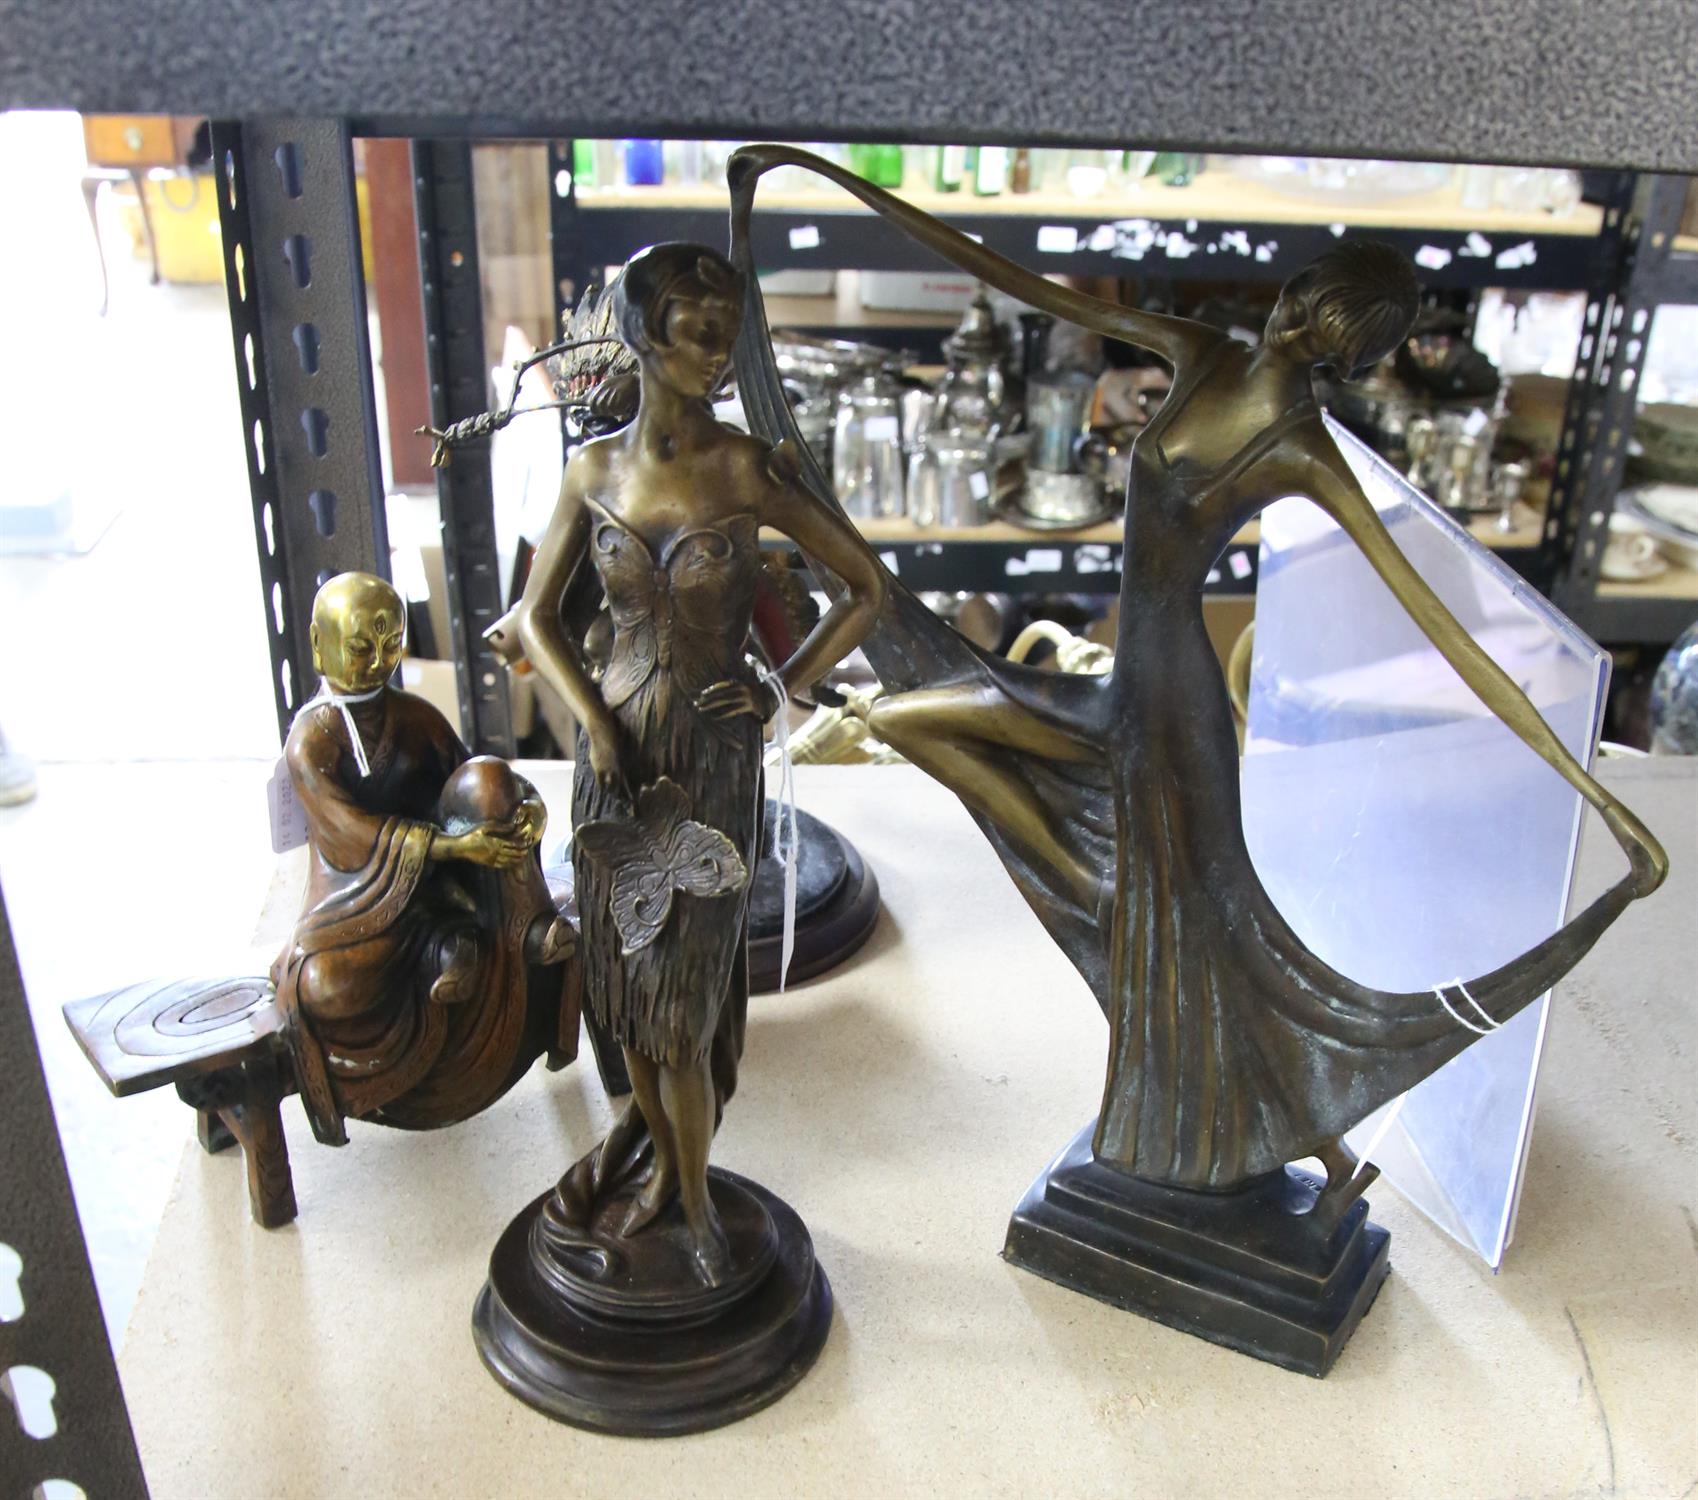 Two cast metal figures of Art Deco women, Native American, and oriental figure on a bench.